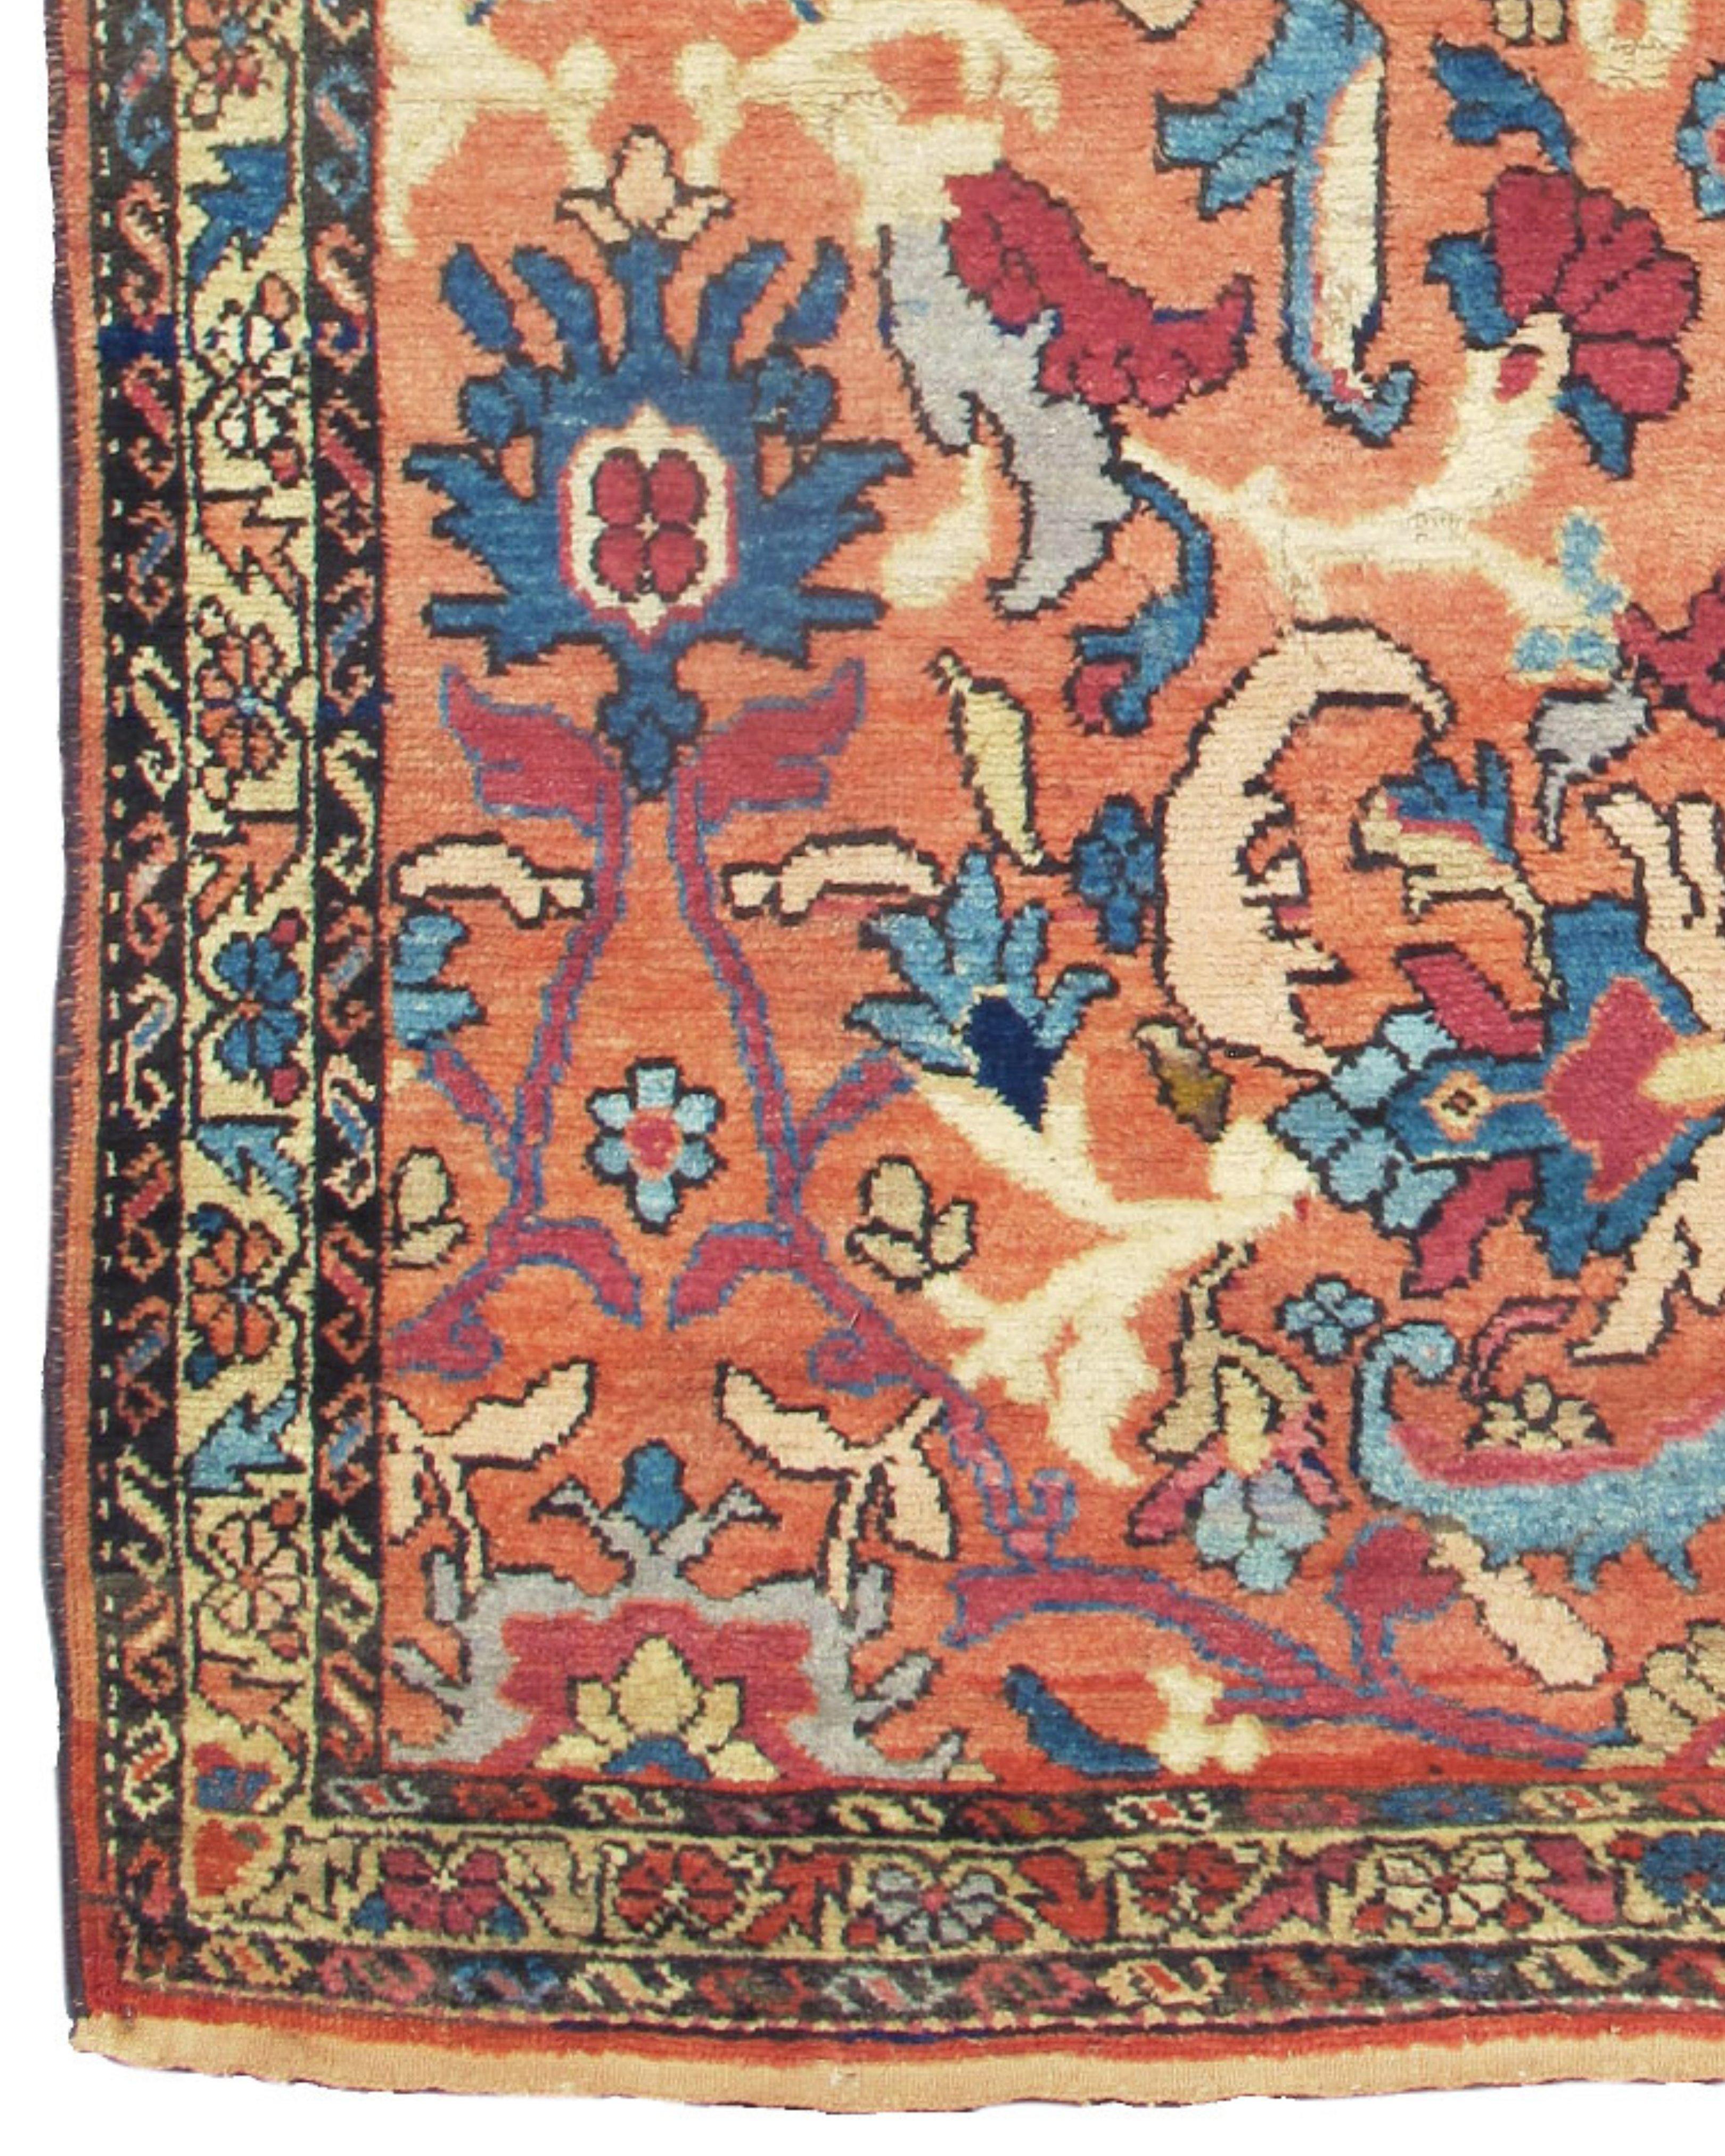 Hand-Knotted Mahal Sampler (Vagireh) Rug, Late 19th Century For Sale